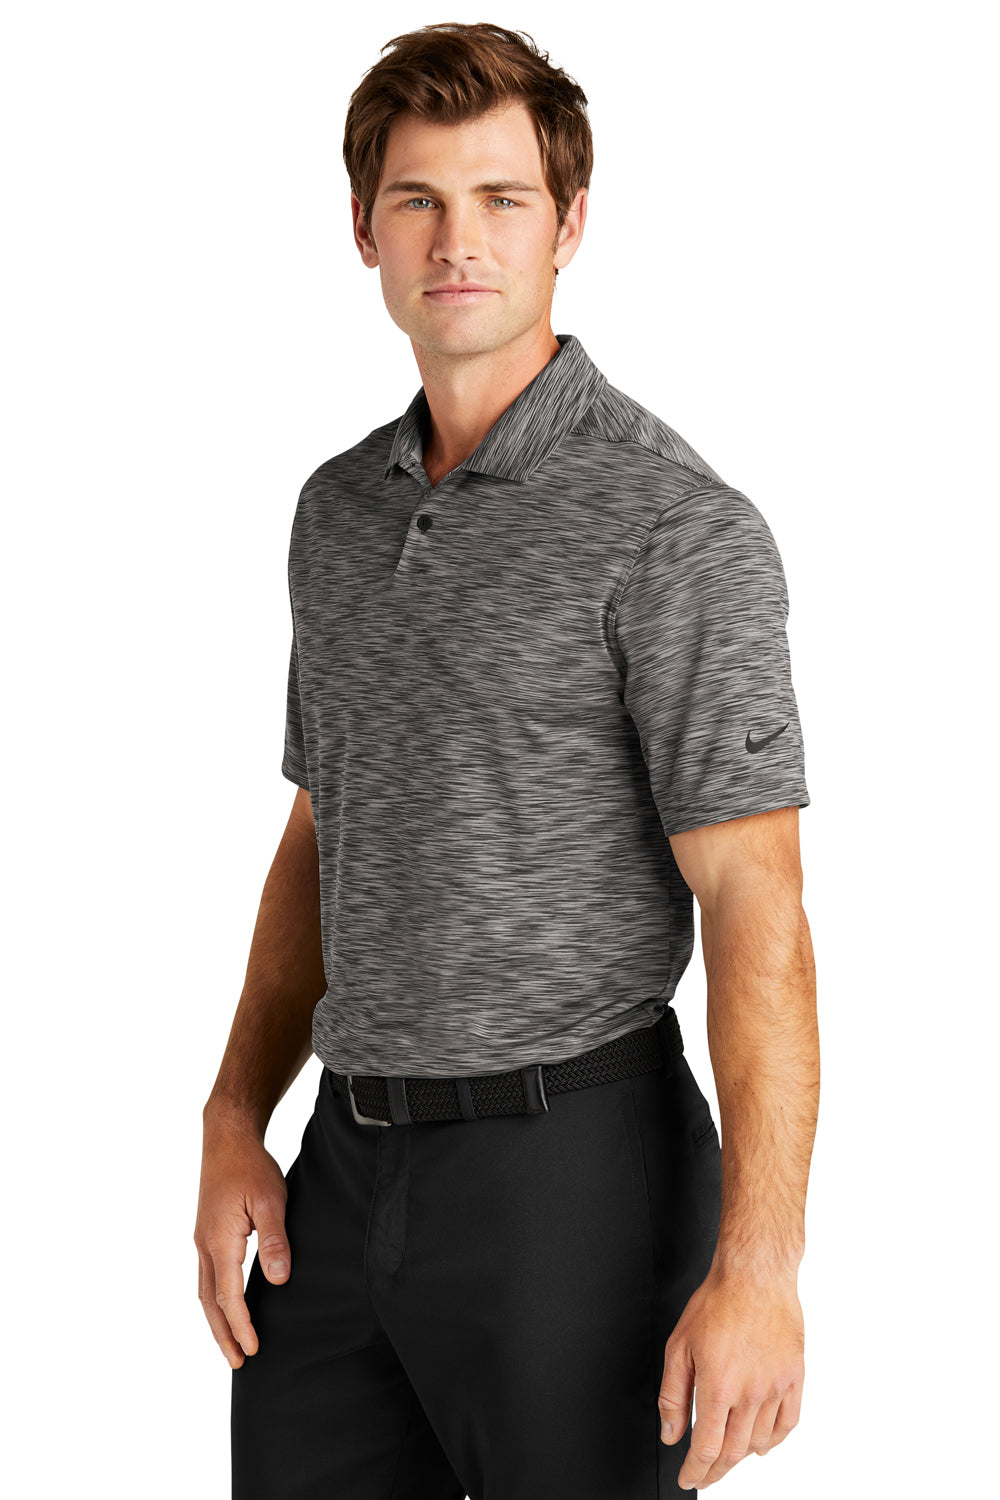 Nike NKDC2109 Mens Vapor Space Dyed Dri-Fit Moisture Wicking Short Sleeve Polo Shirt Anthracite Grey Model 3Q